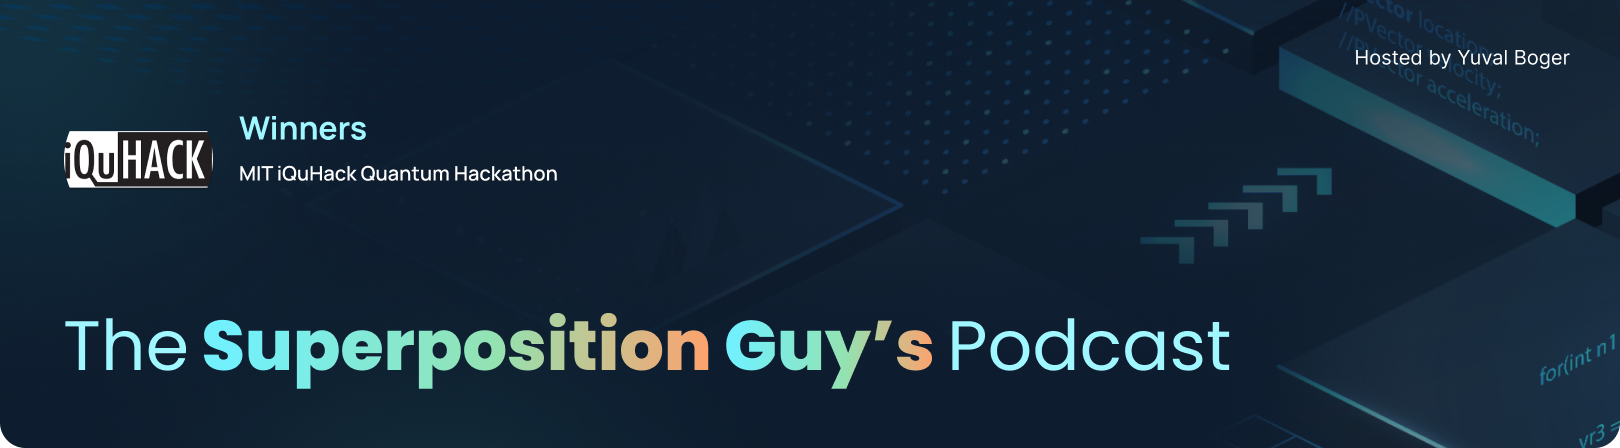 The Superposition Guy's Podcast